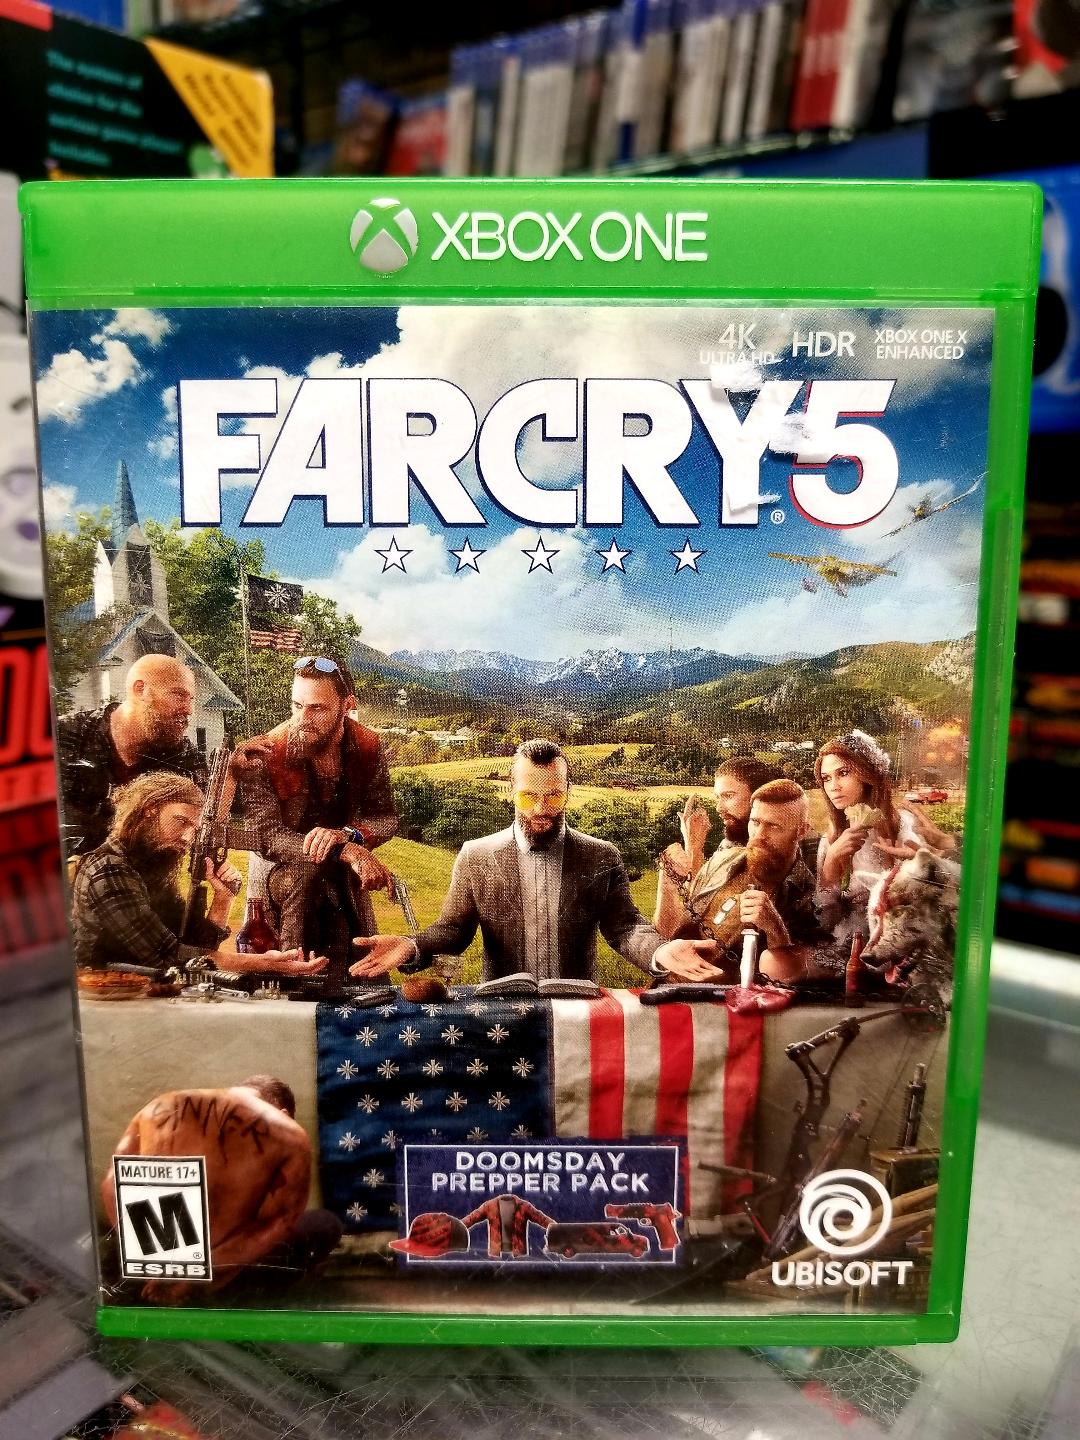  Far Cry 4 Complete Edition - Xbox One : Ubisoft: Movies & TV